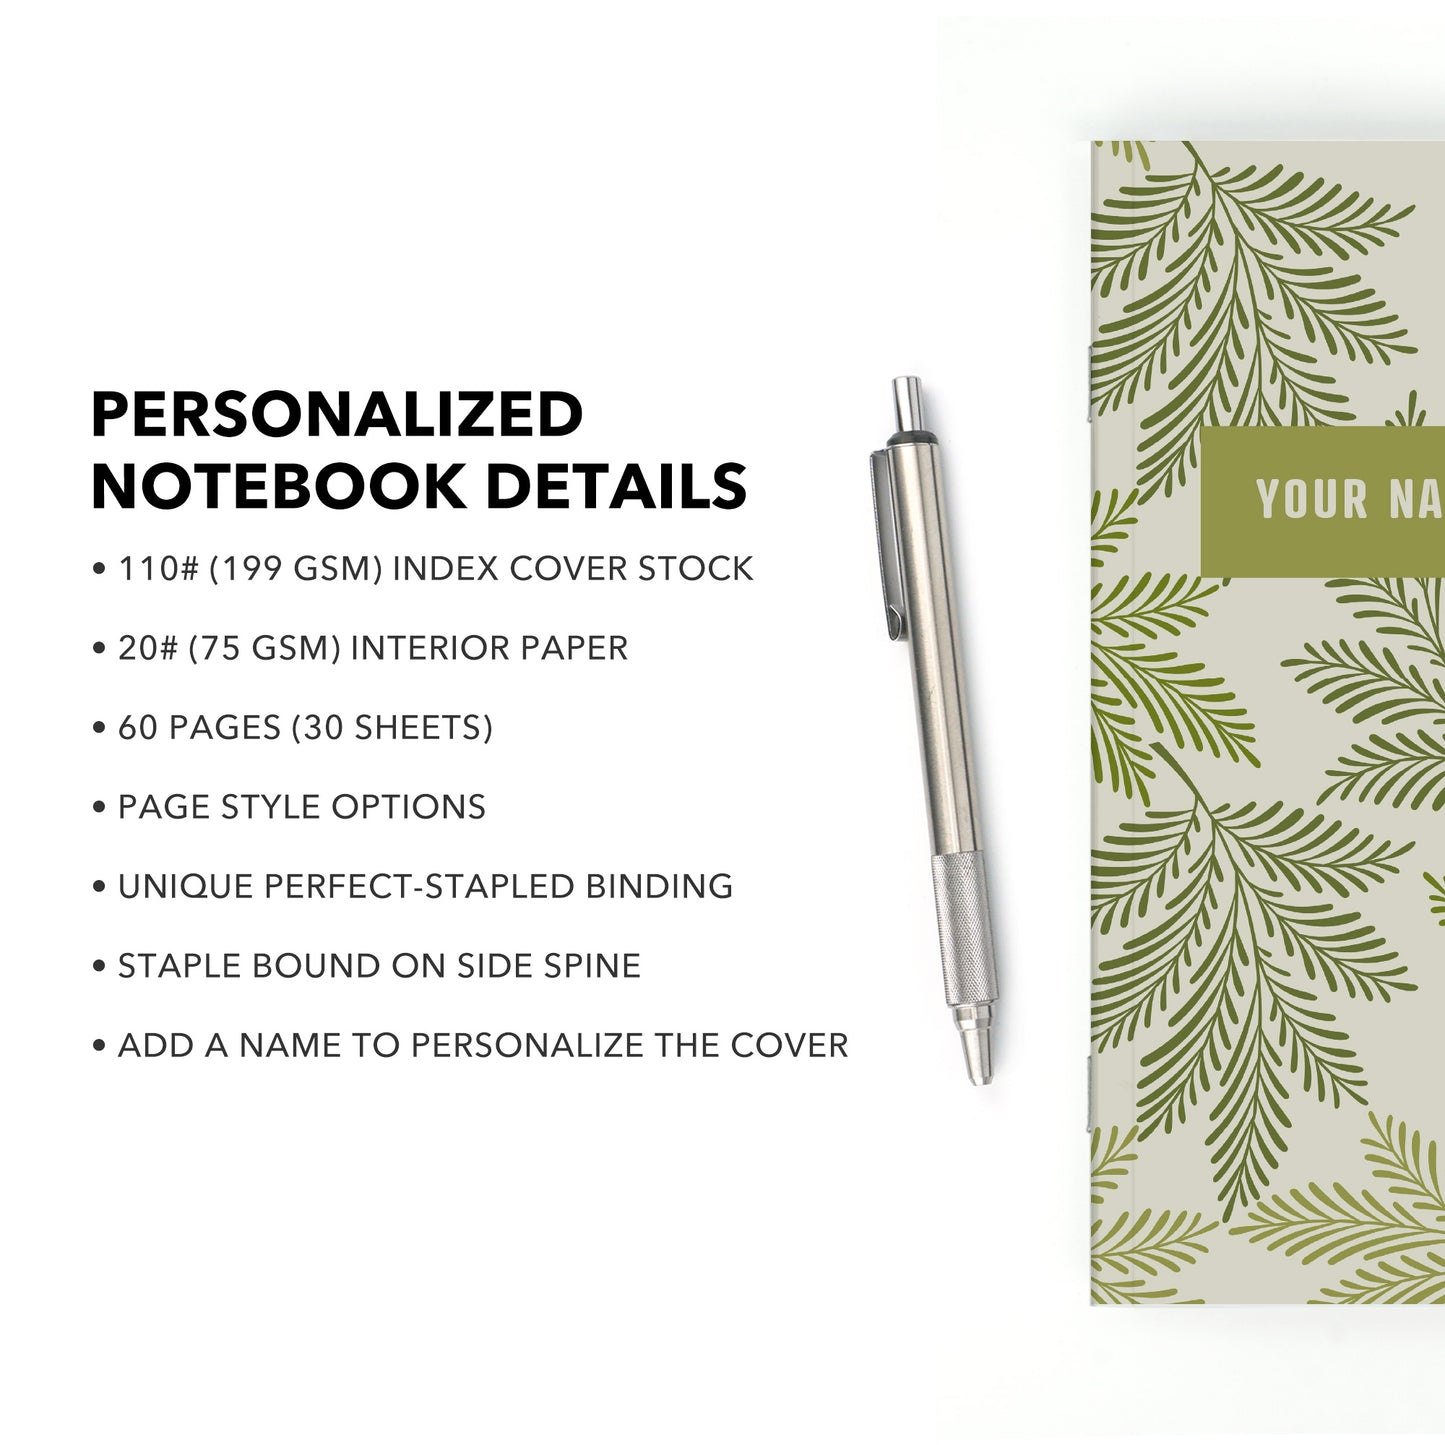 Personalized Notebook, Green Leaves, Add Your Name